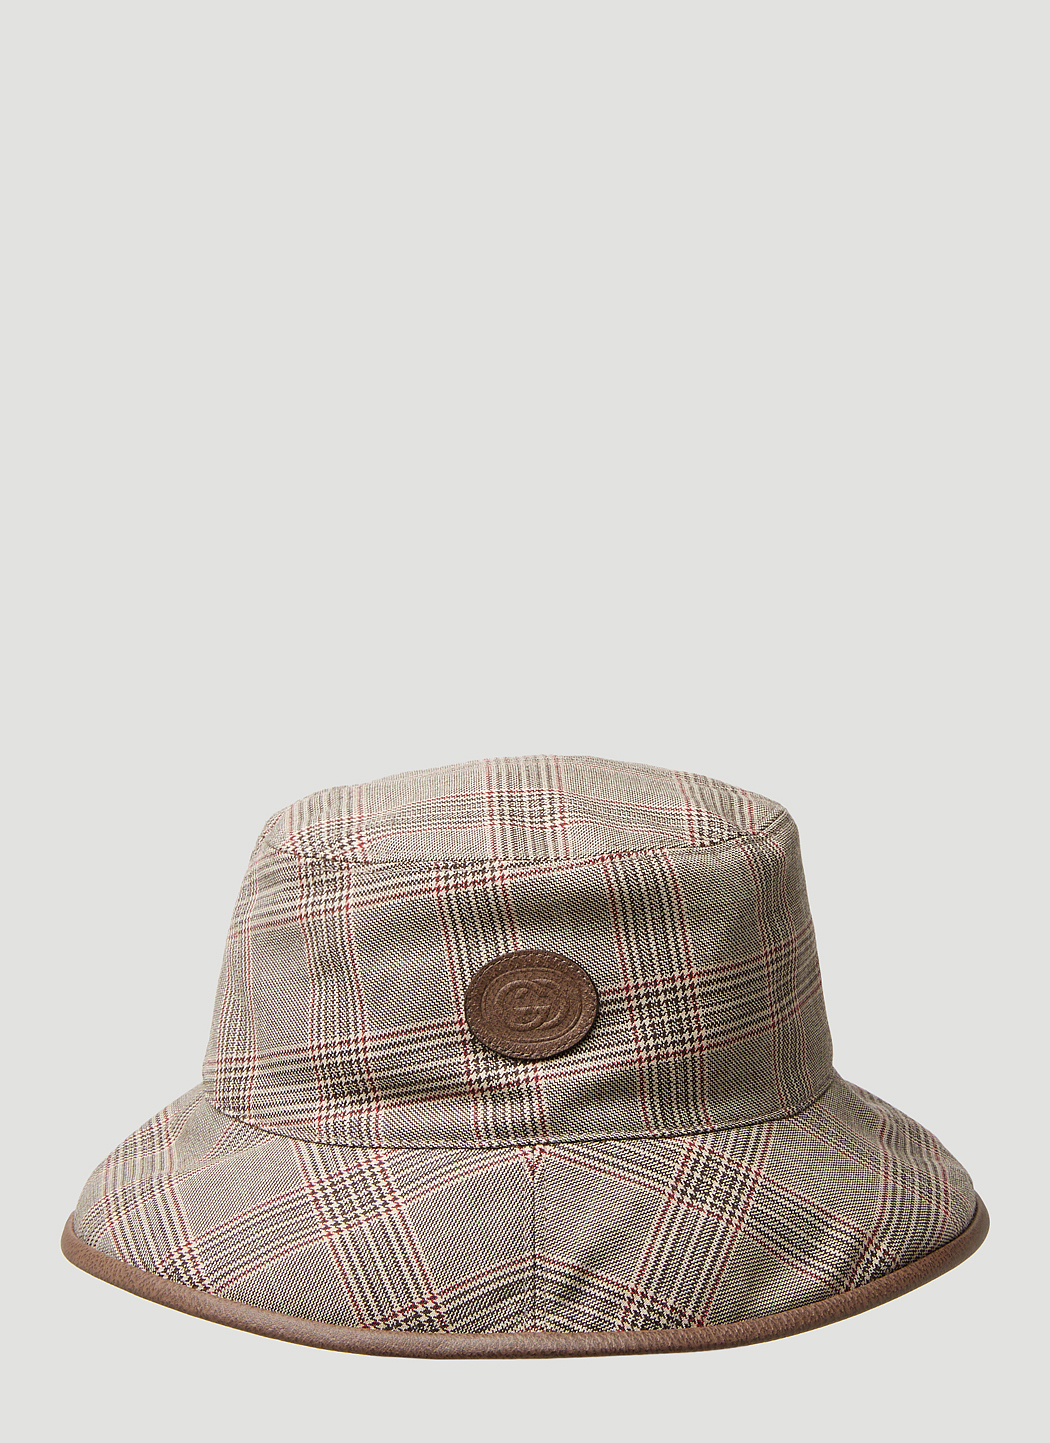 Brown Reversible hat in GG canvas and nylon